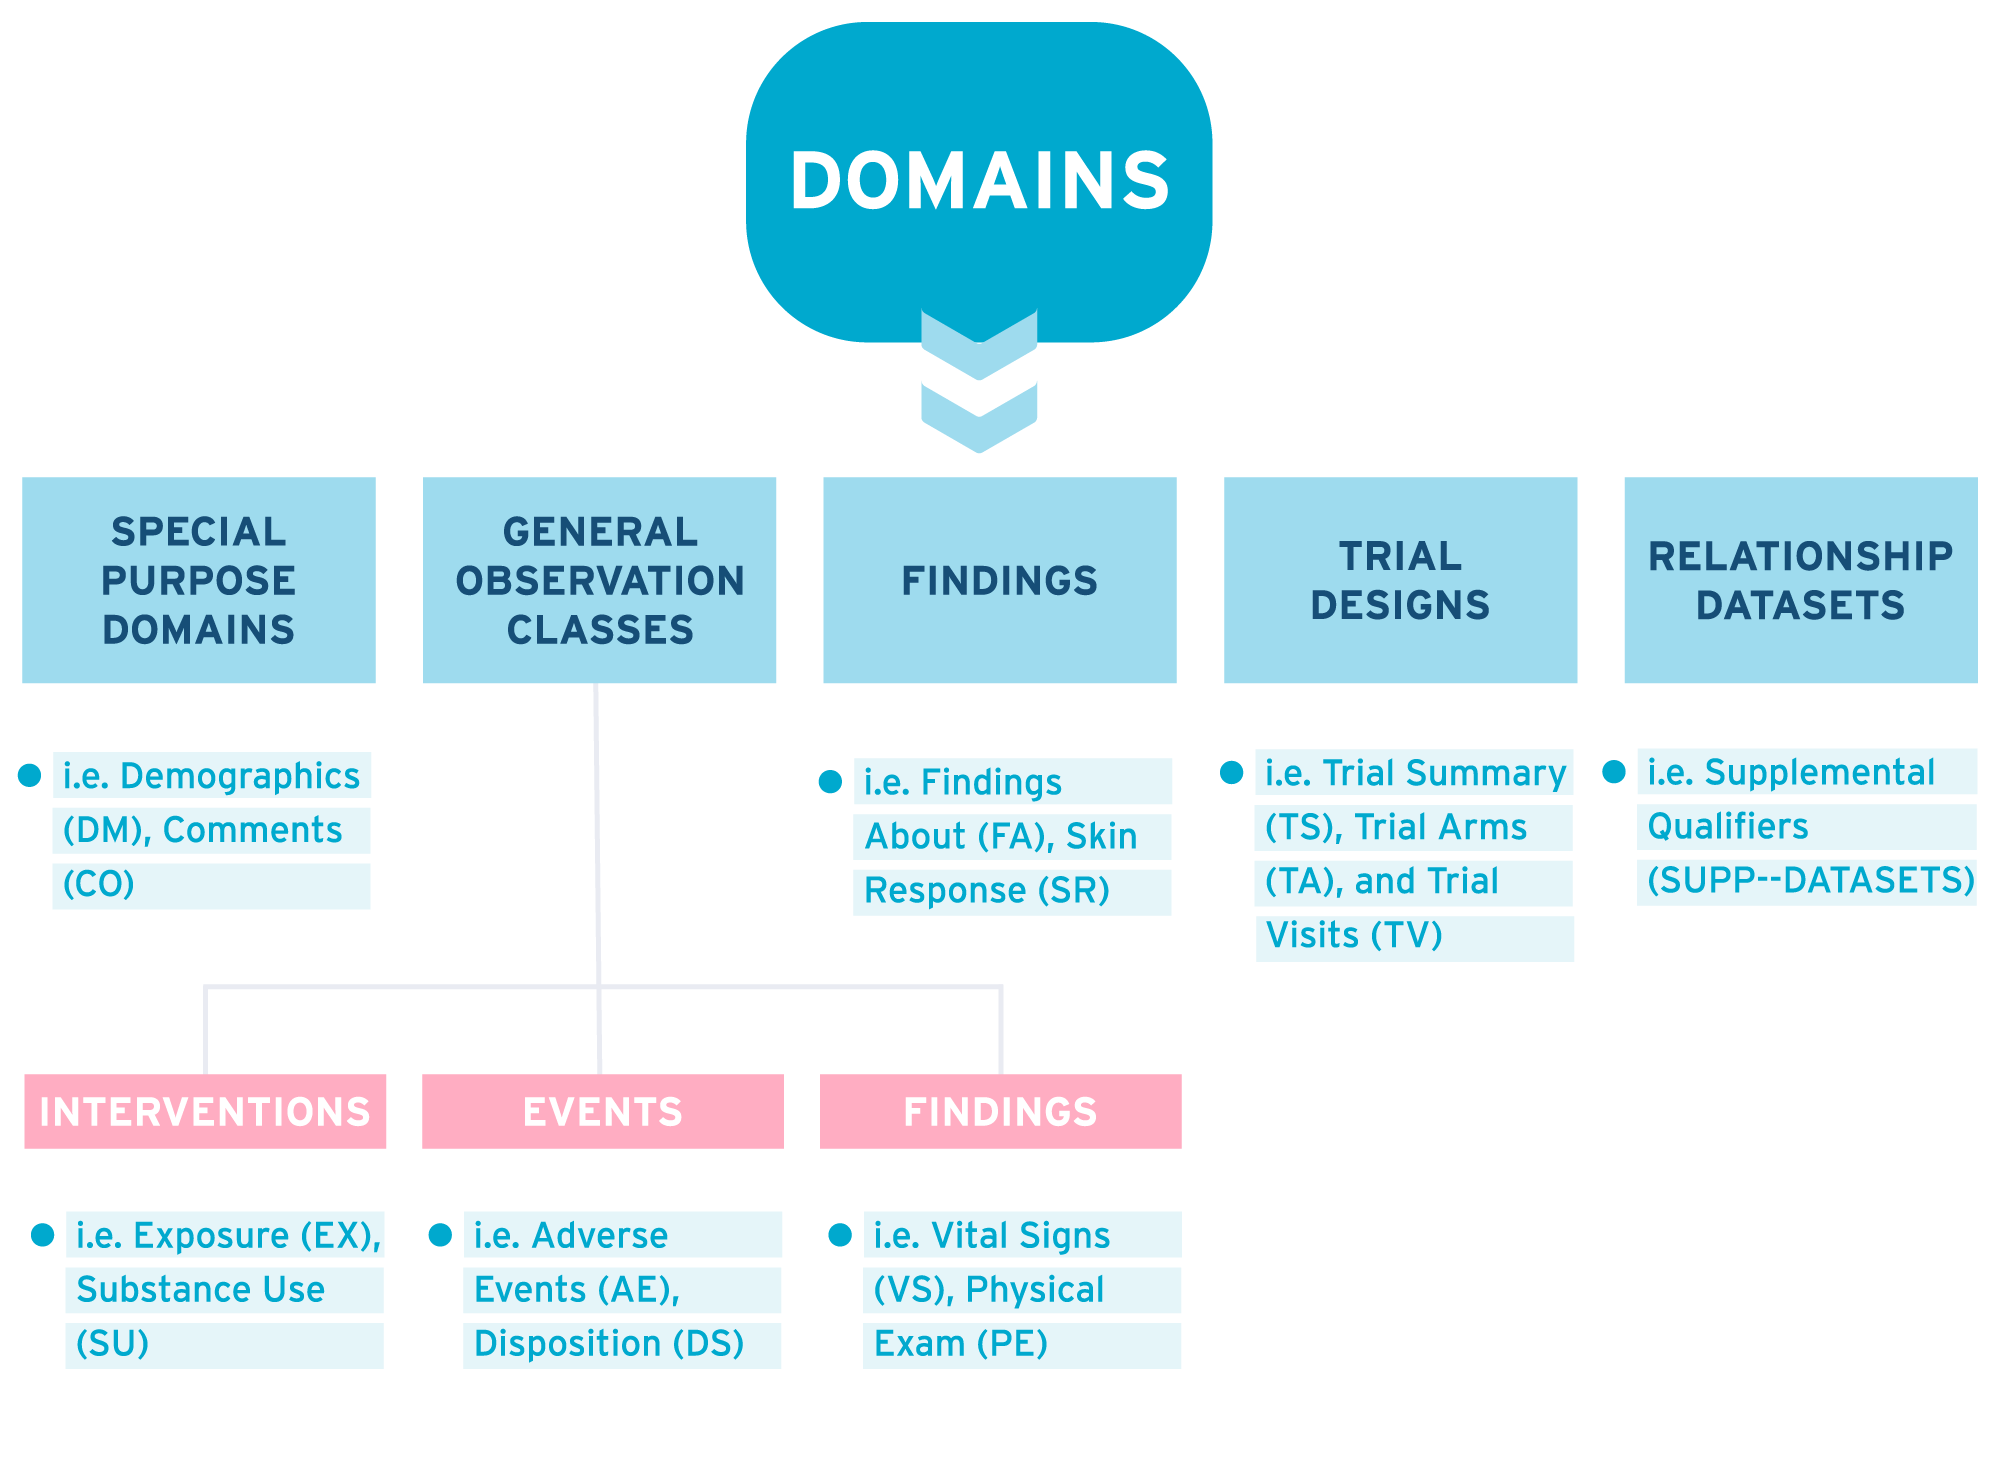 SDTM domains infographic